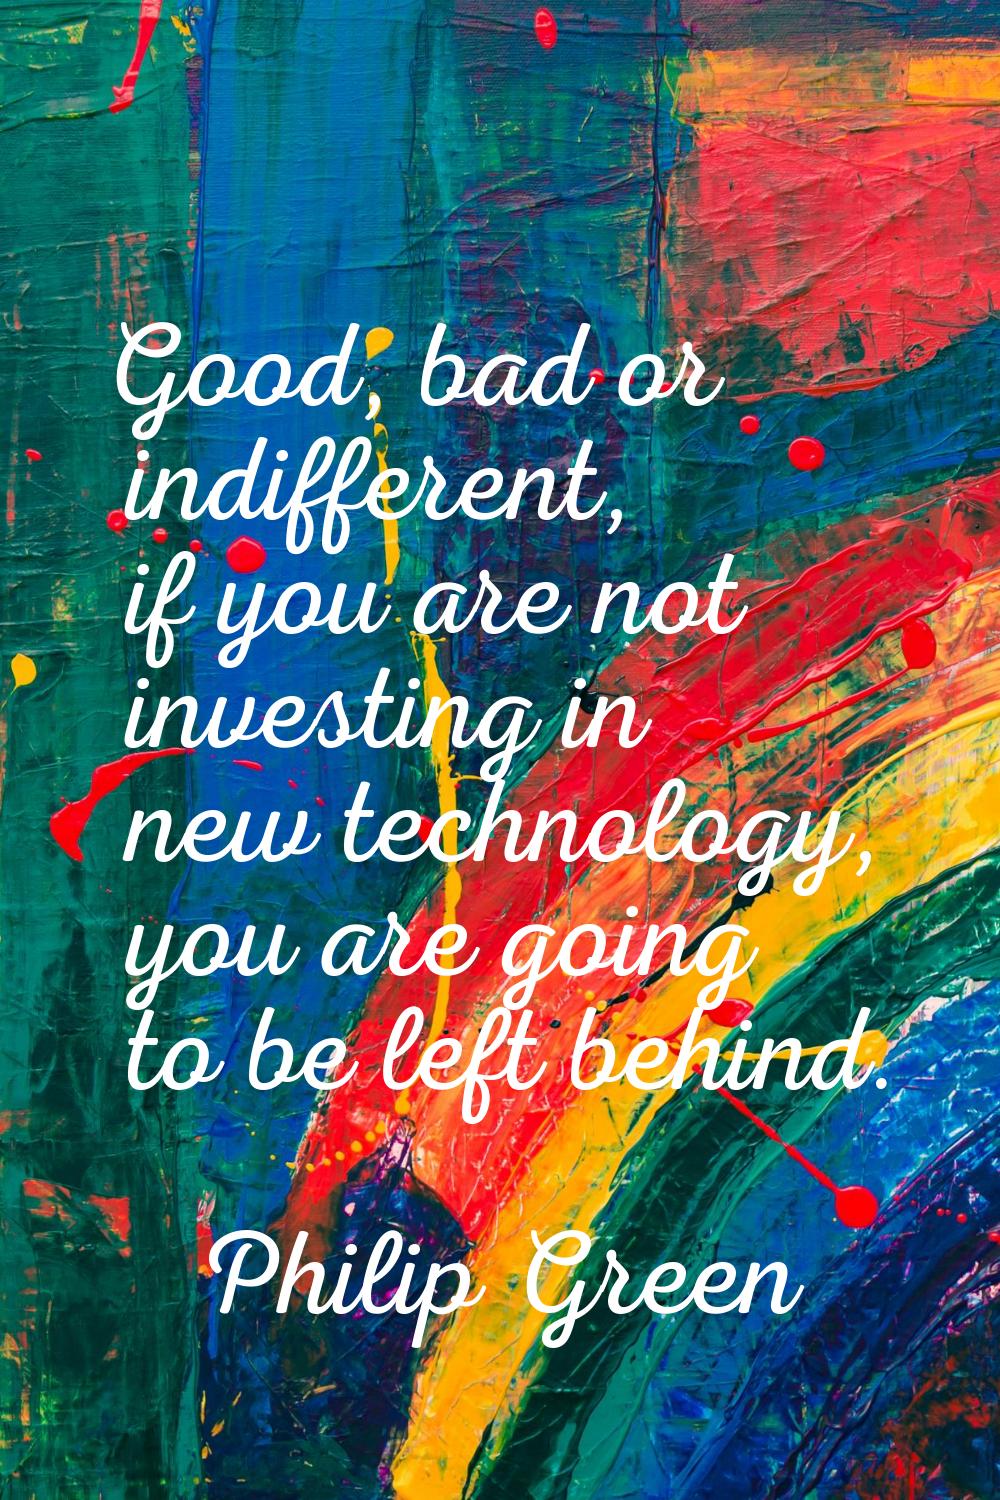 Good, bad or indifferent, if you are not investing in new technology, you are going to be left behi